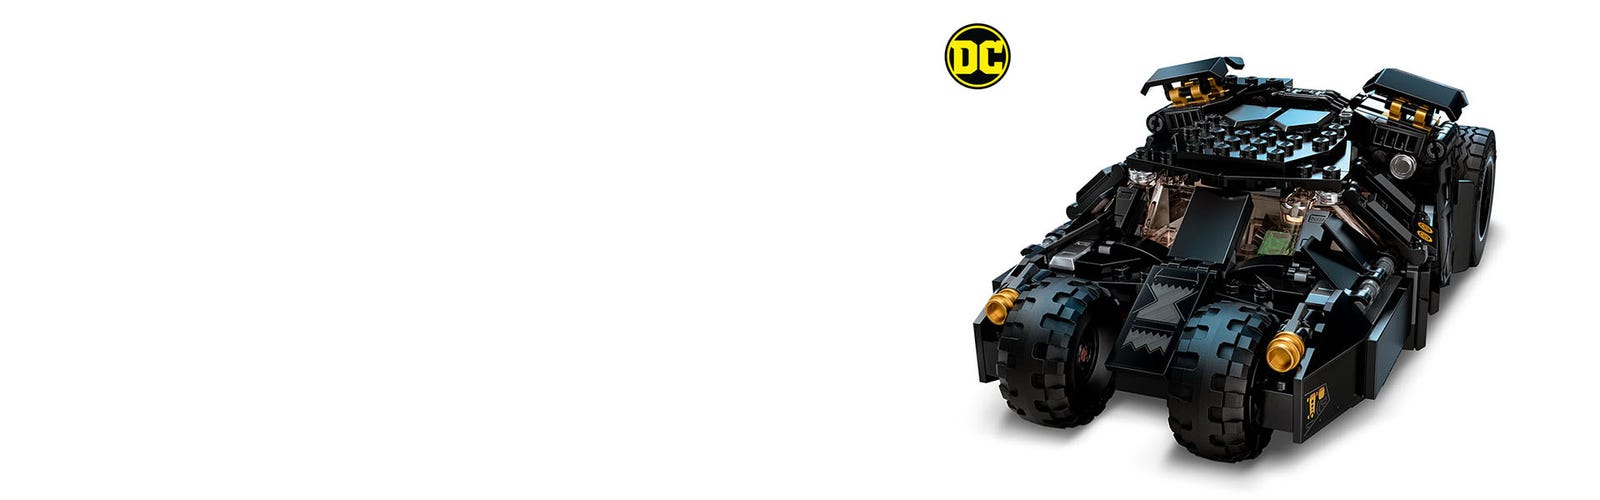 LEGO Batman Tumbler expected to launch this fall - 9to5Toys